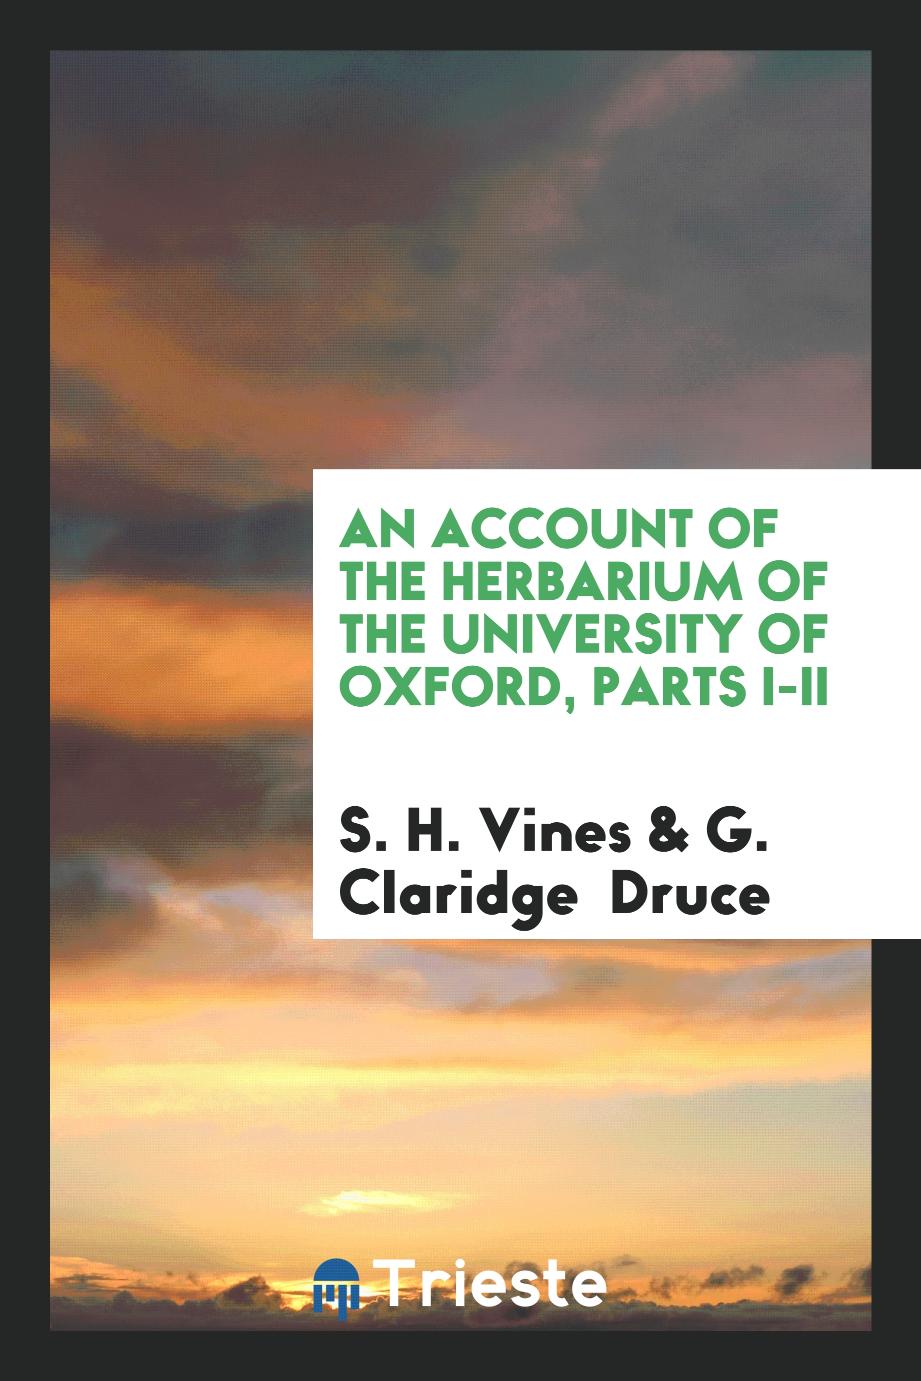 An account of the herbarium of the University of Oxford, Parts I-II